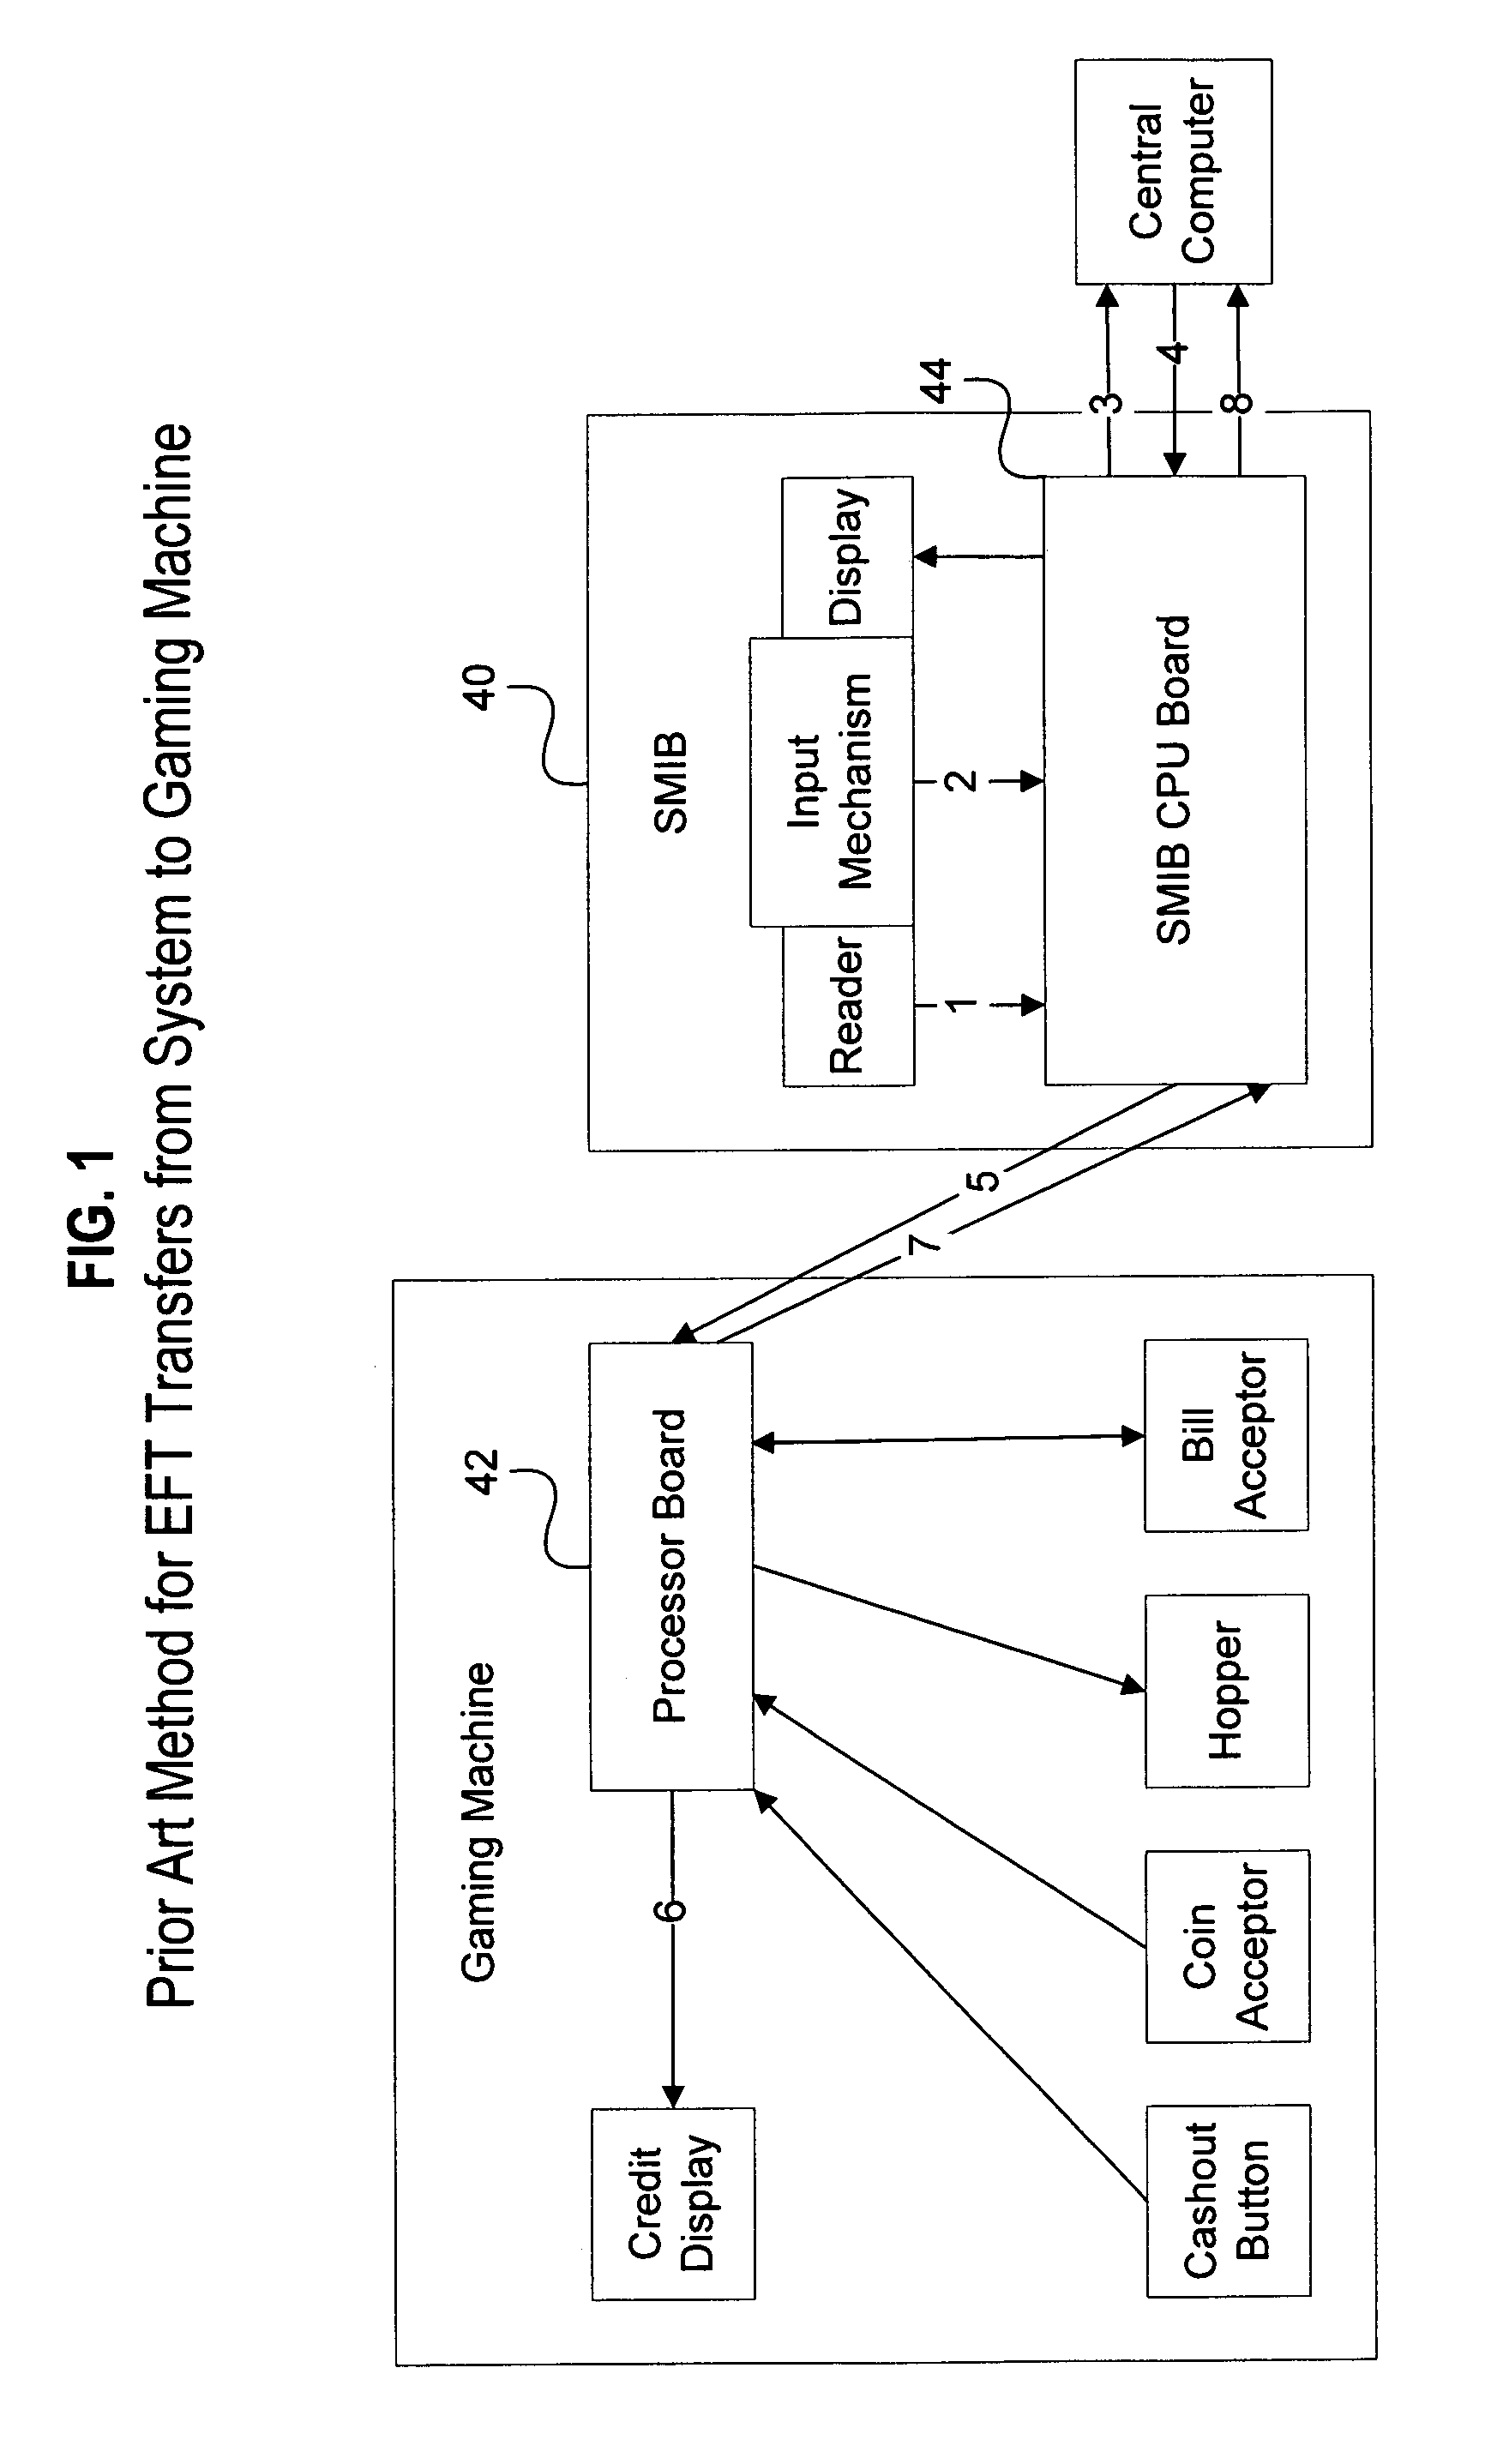 Cashless gaming apparatus, system, and method of use